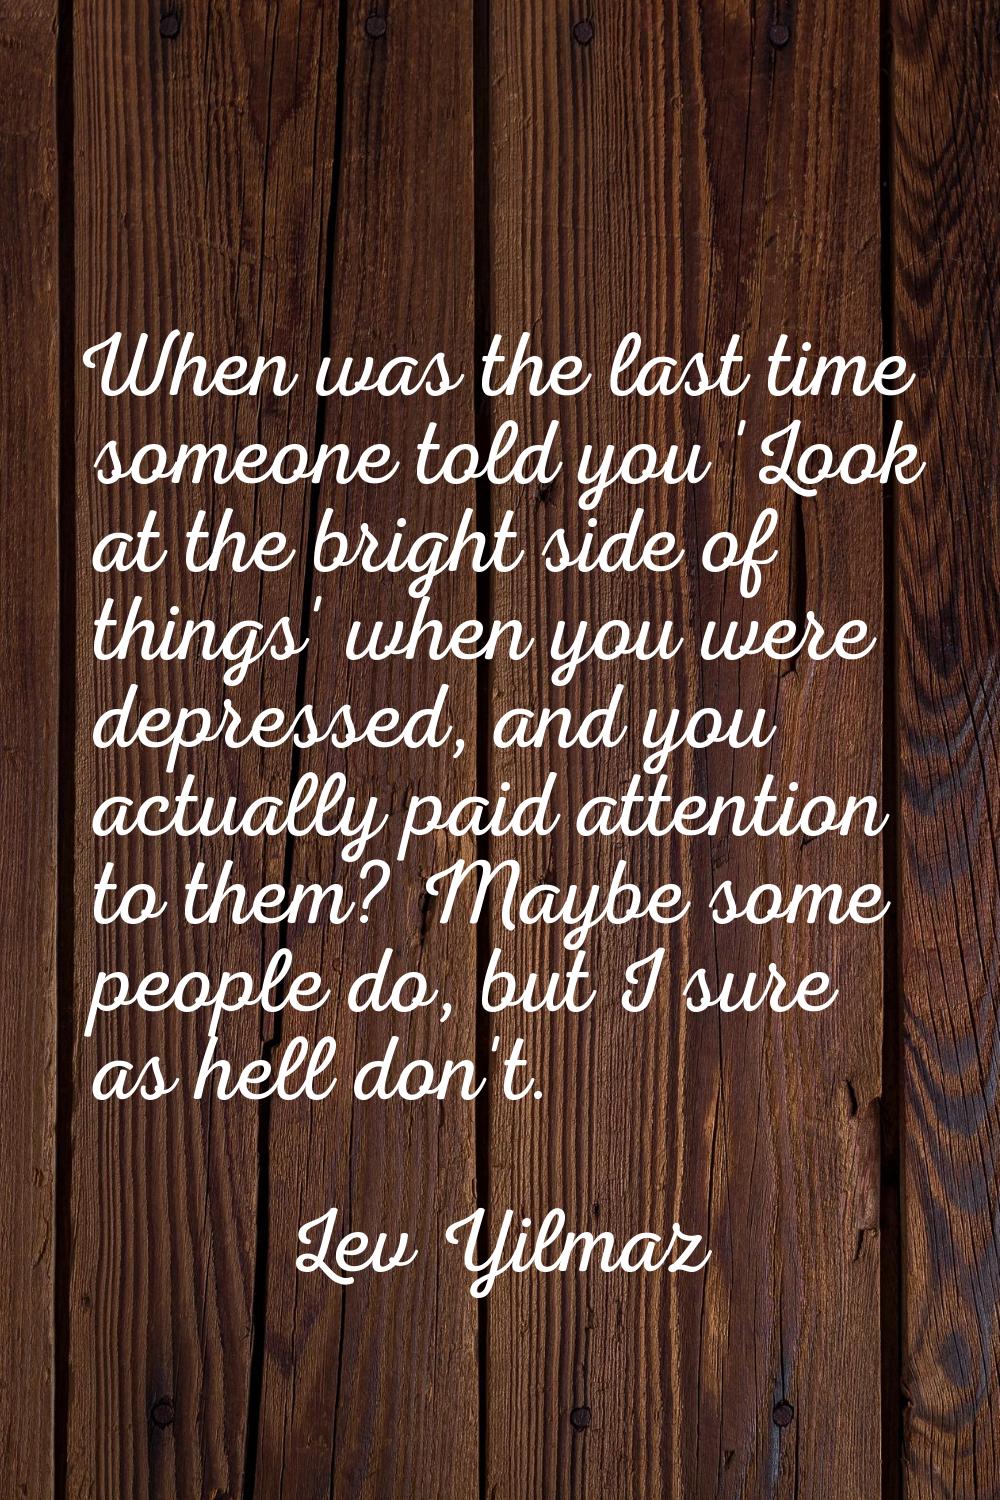 When was the last time someone told you 'Look at the bright side of things' when you were depressed